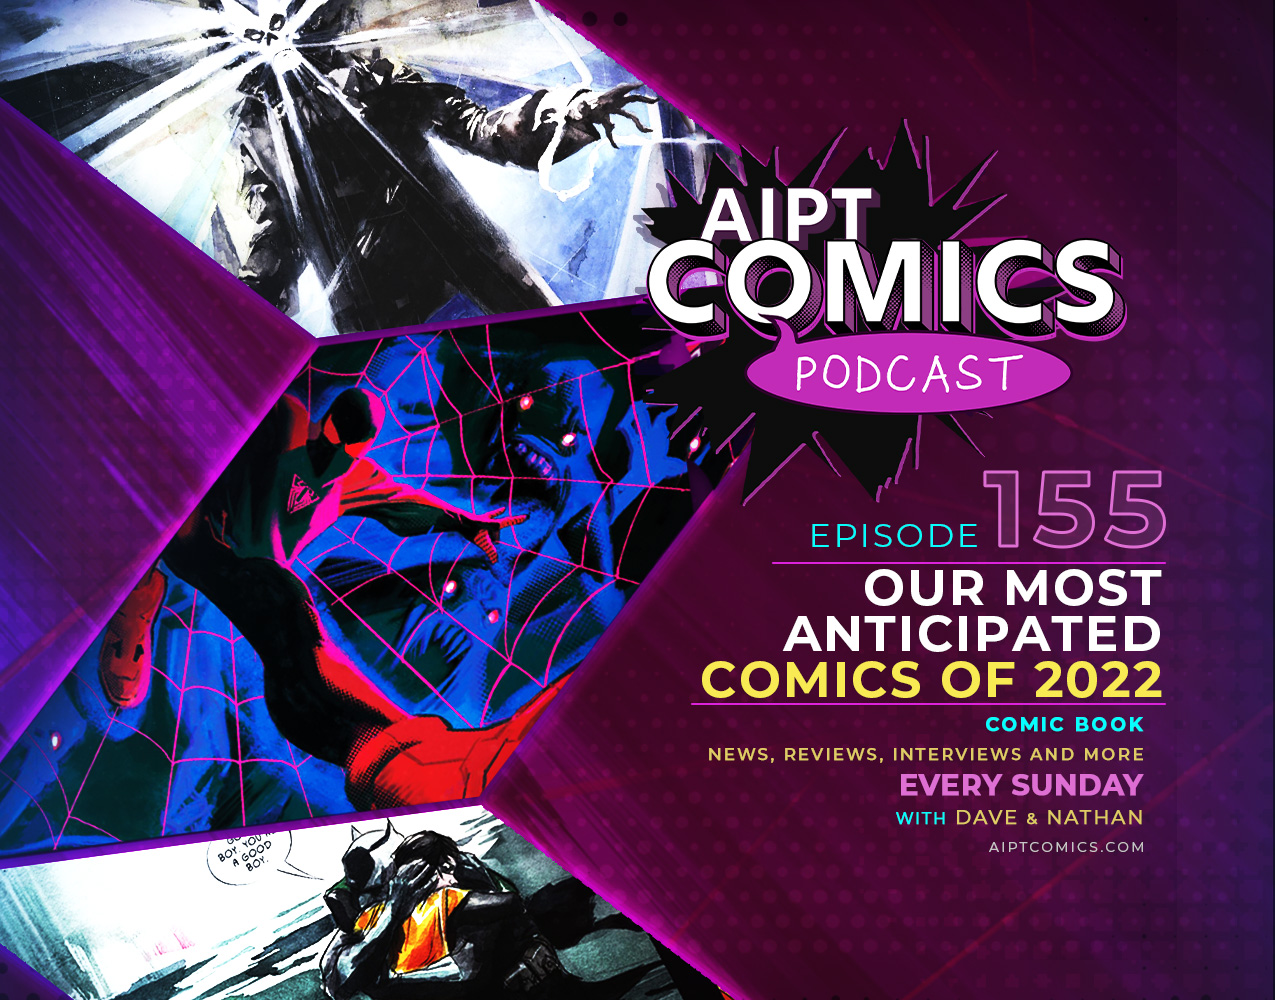 AIPT Comics podcast episode 155: Our most anticipated comics of 2022